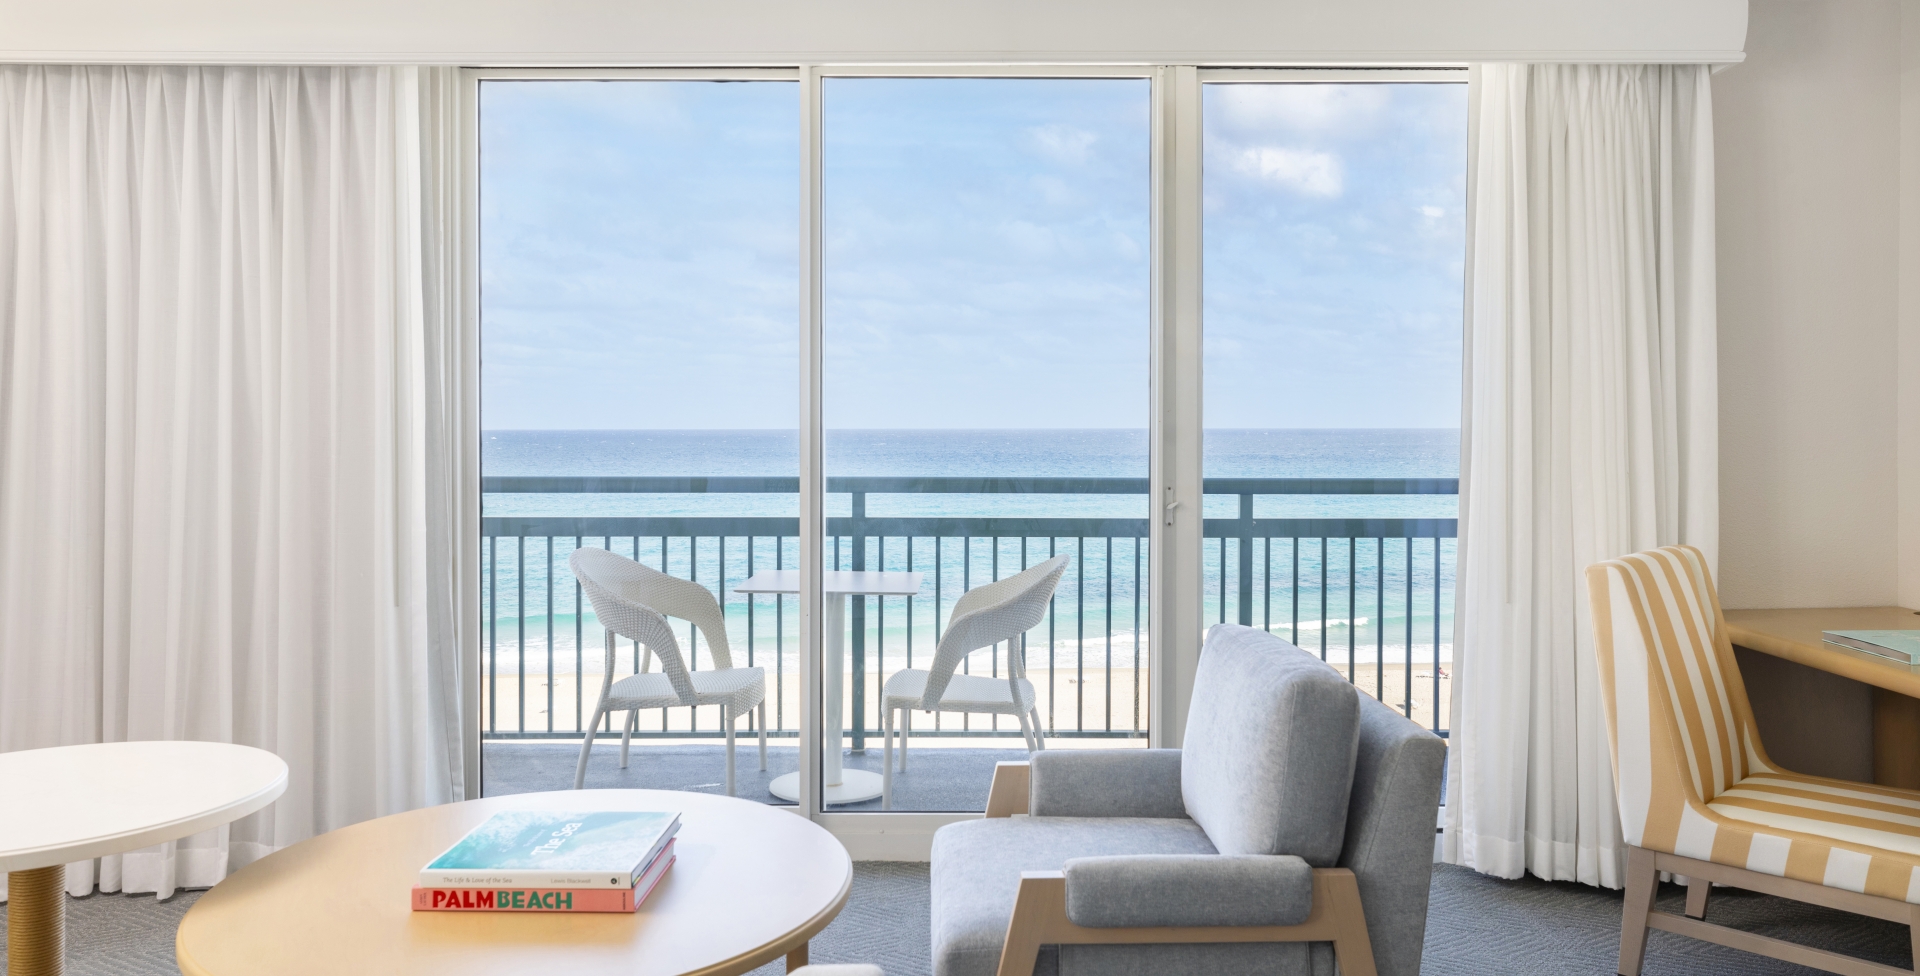 Spacious beachfront suite with panoramic ocean views in west palm beach